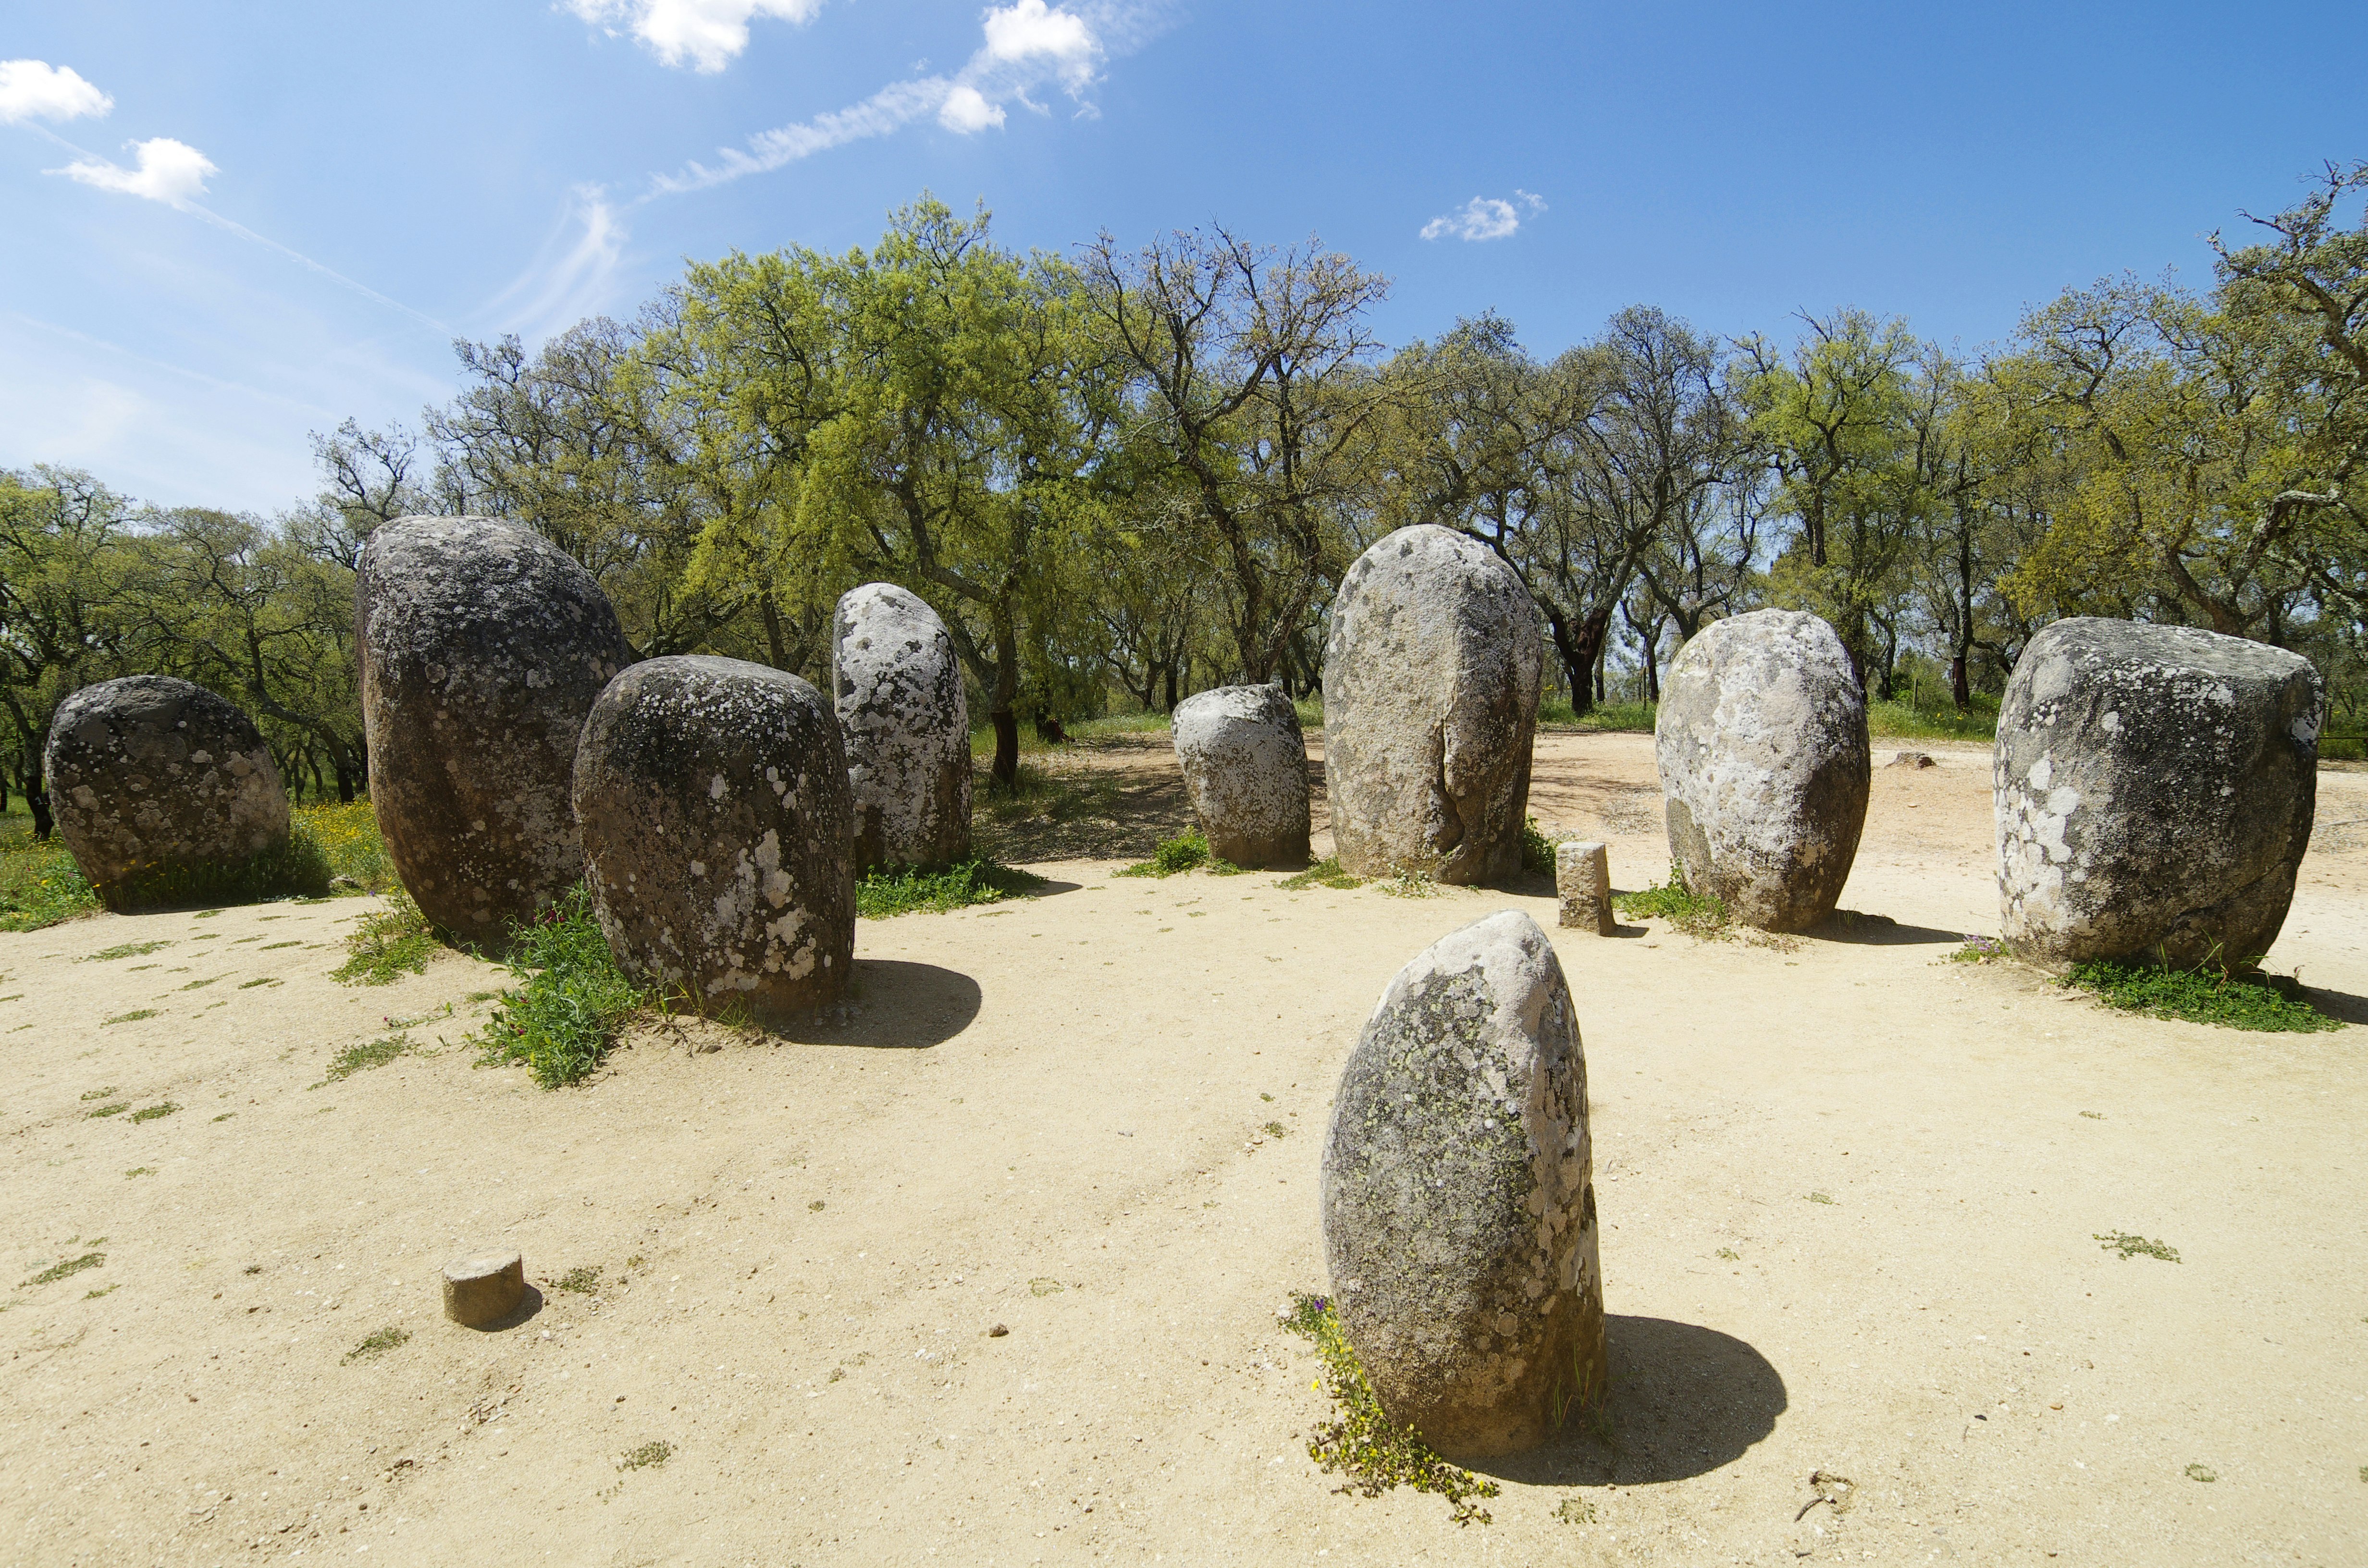 A collection of stone circles are placed in a semi circle on a sandy clearing near a forest in Portugal.